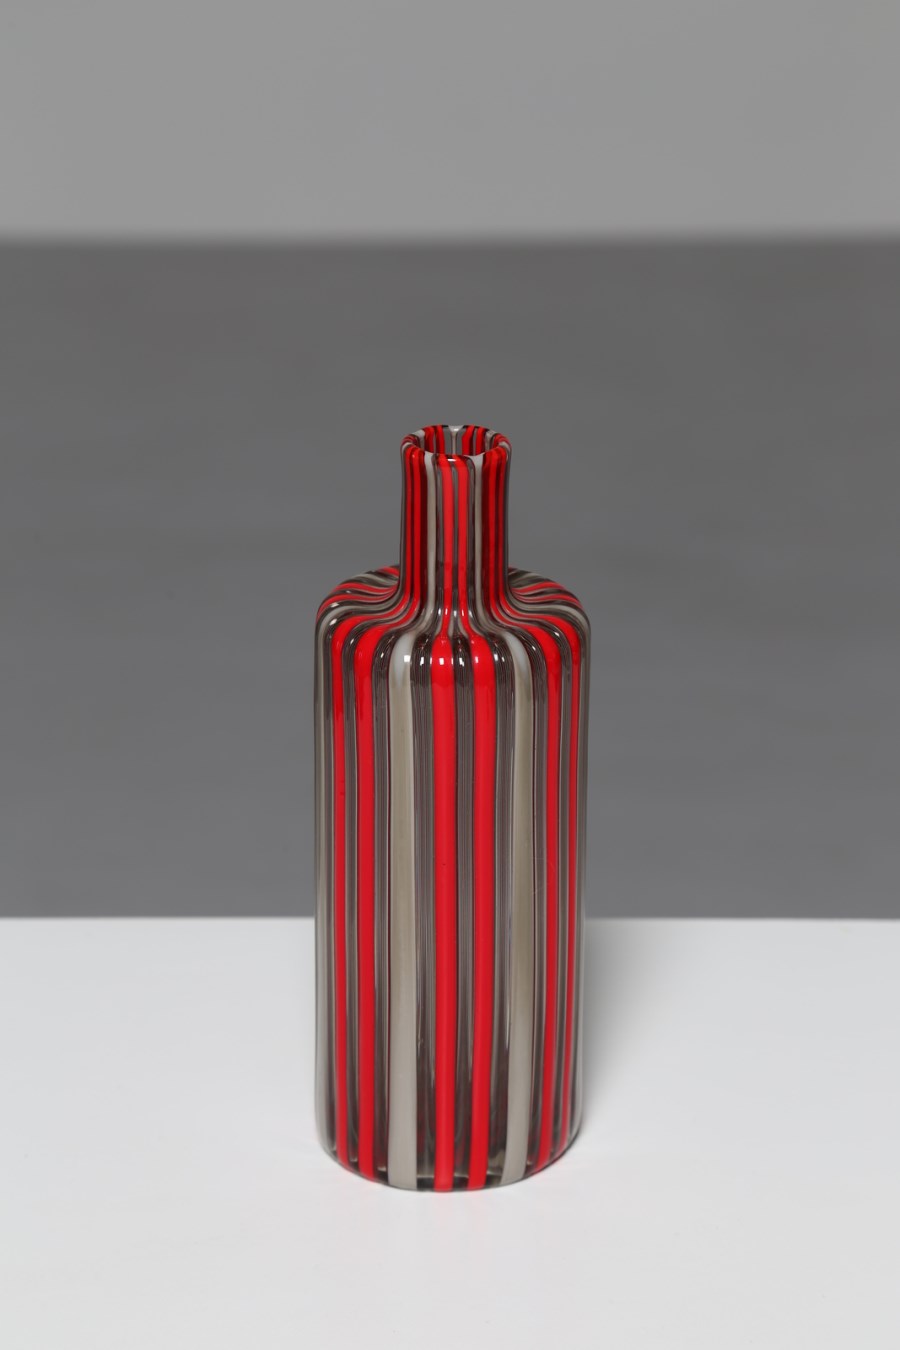 Bottle with vertical reeds. (Paolo Venini)